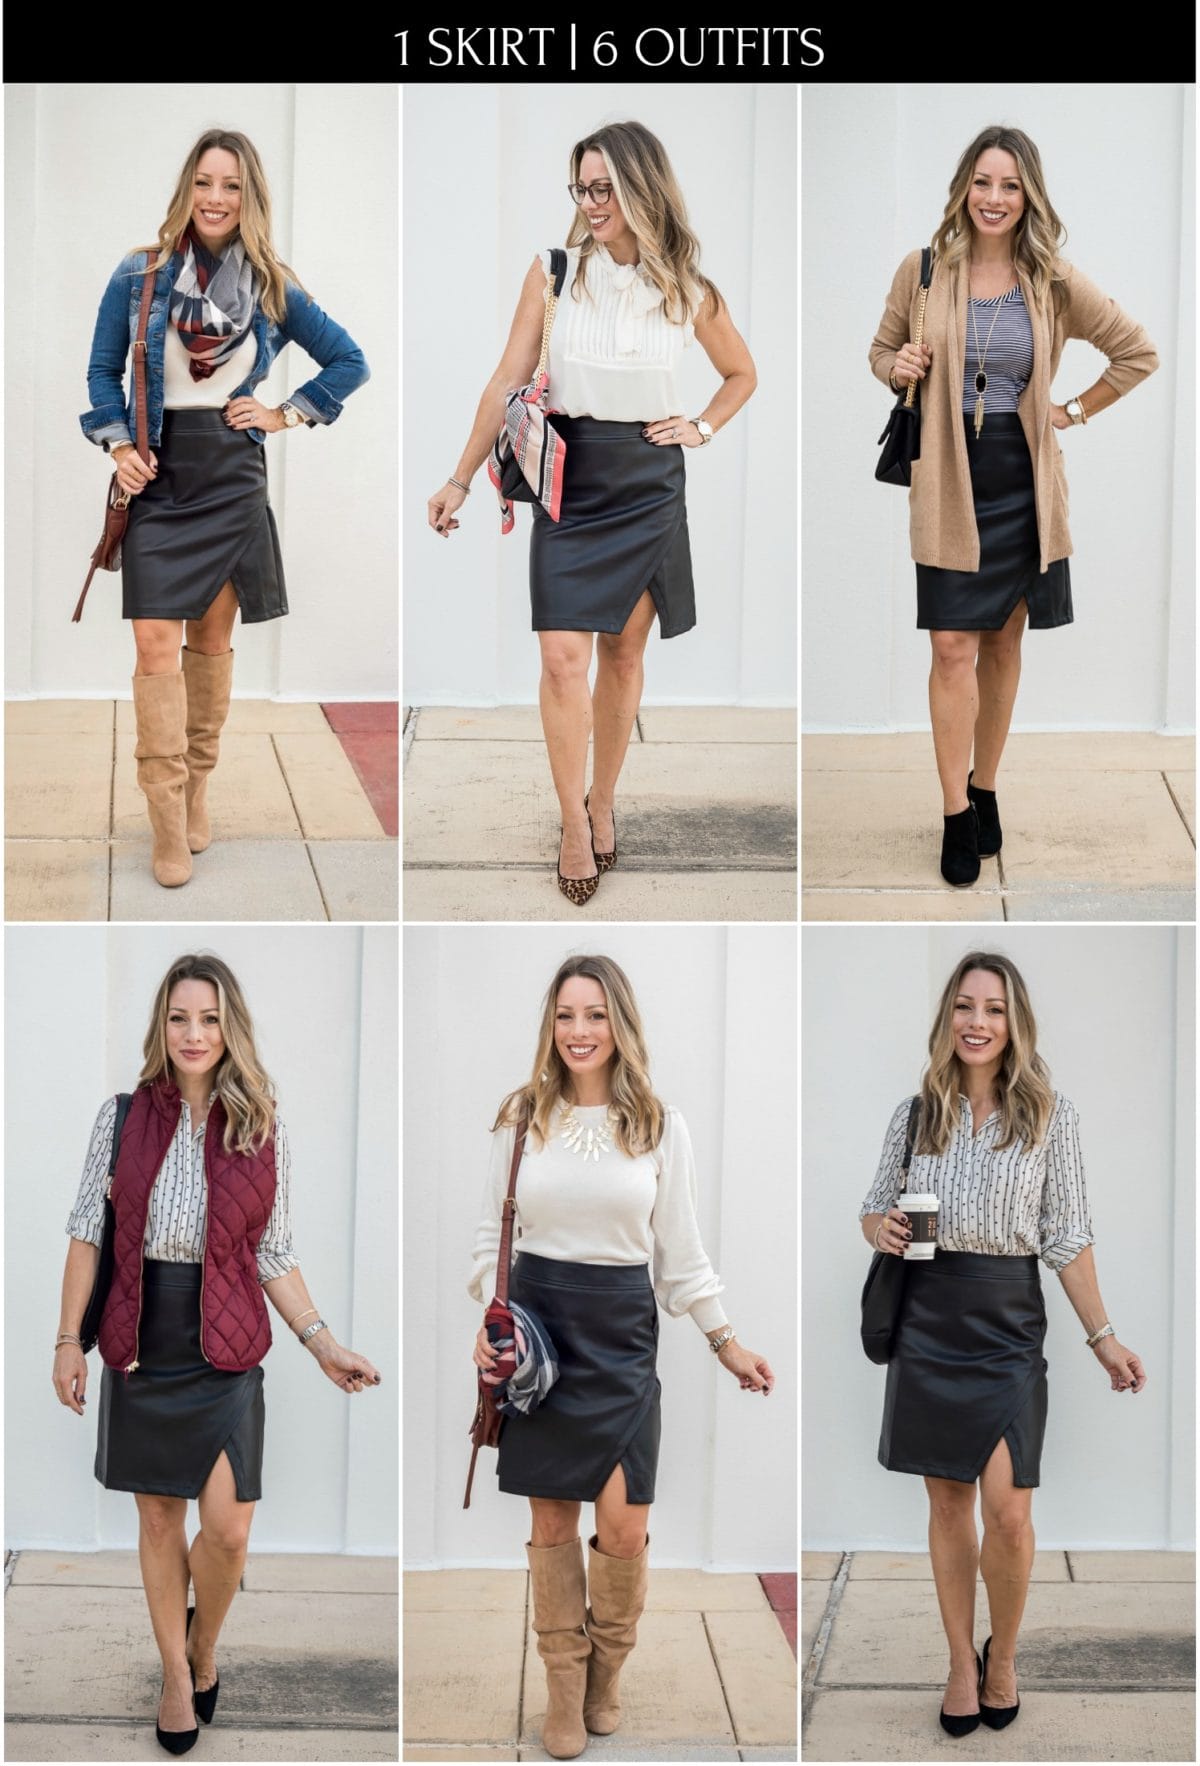 LOFT black leather skirt outfit ideas for fall